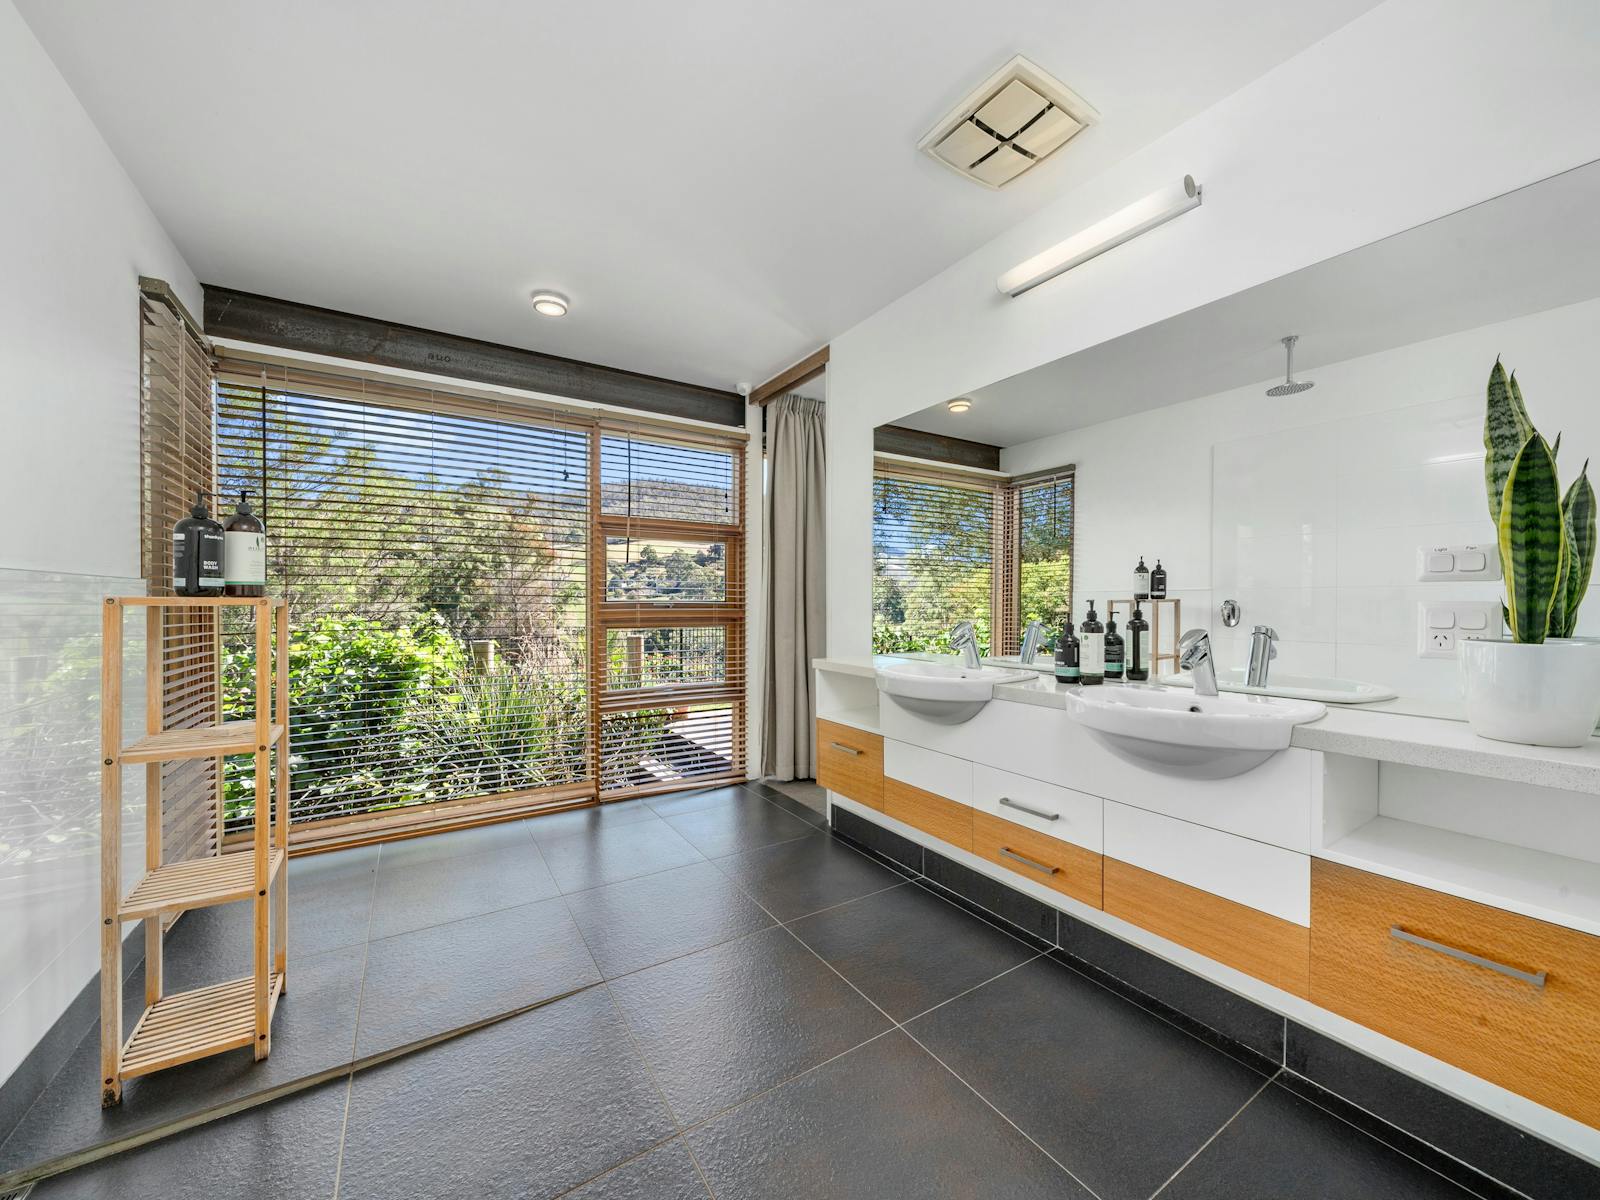 The ensuite is spacious and has an open-sided shower